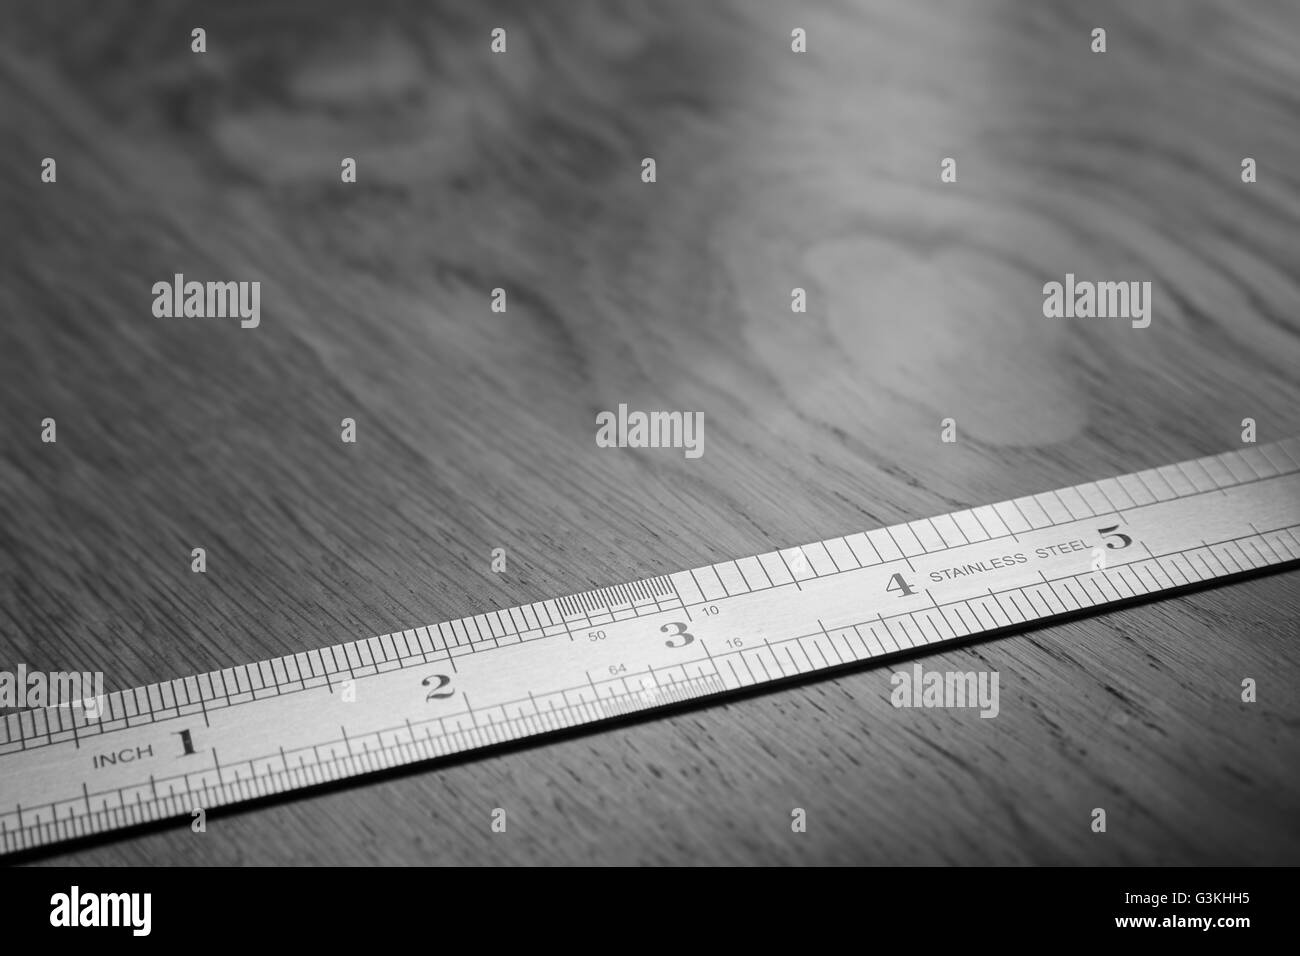 Metal ruler on wooden table Stock Photo